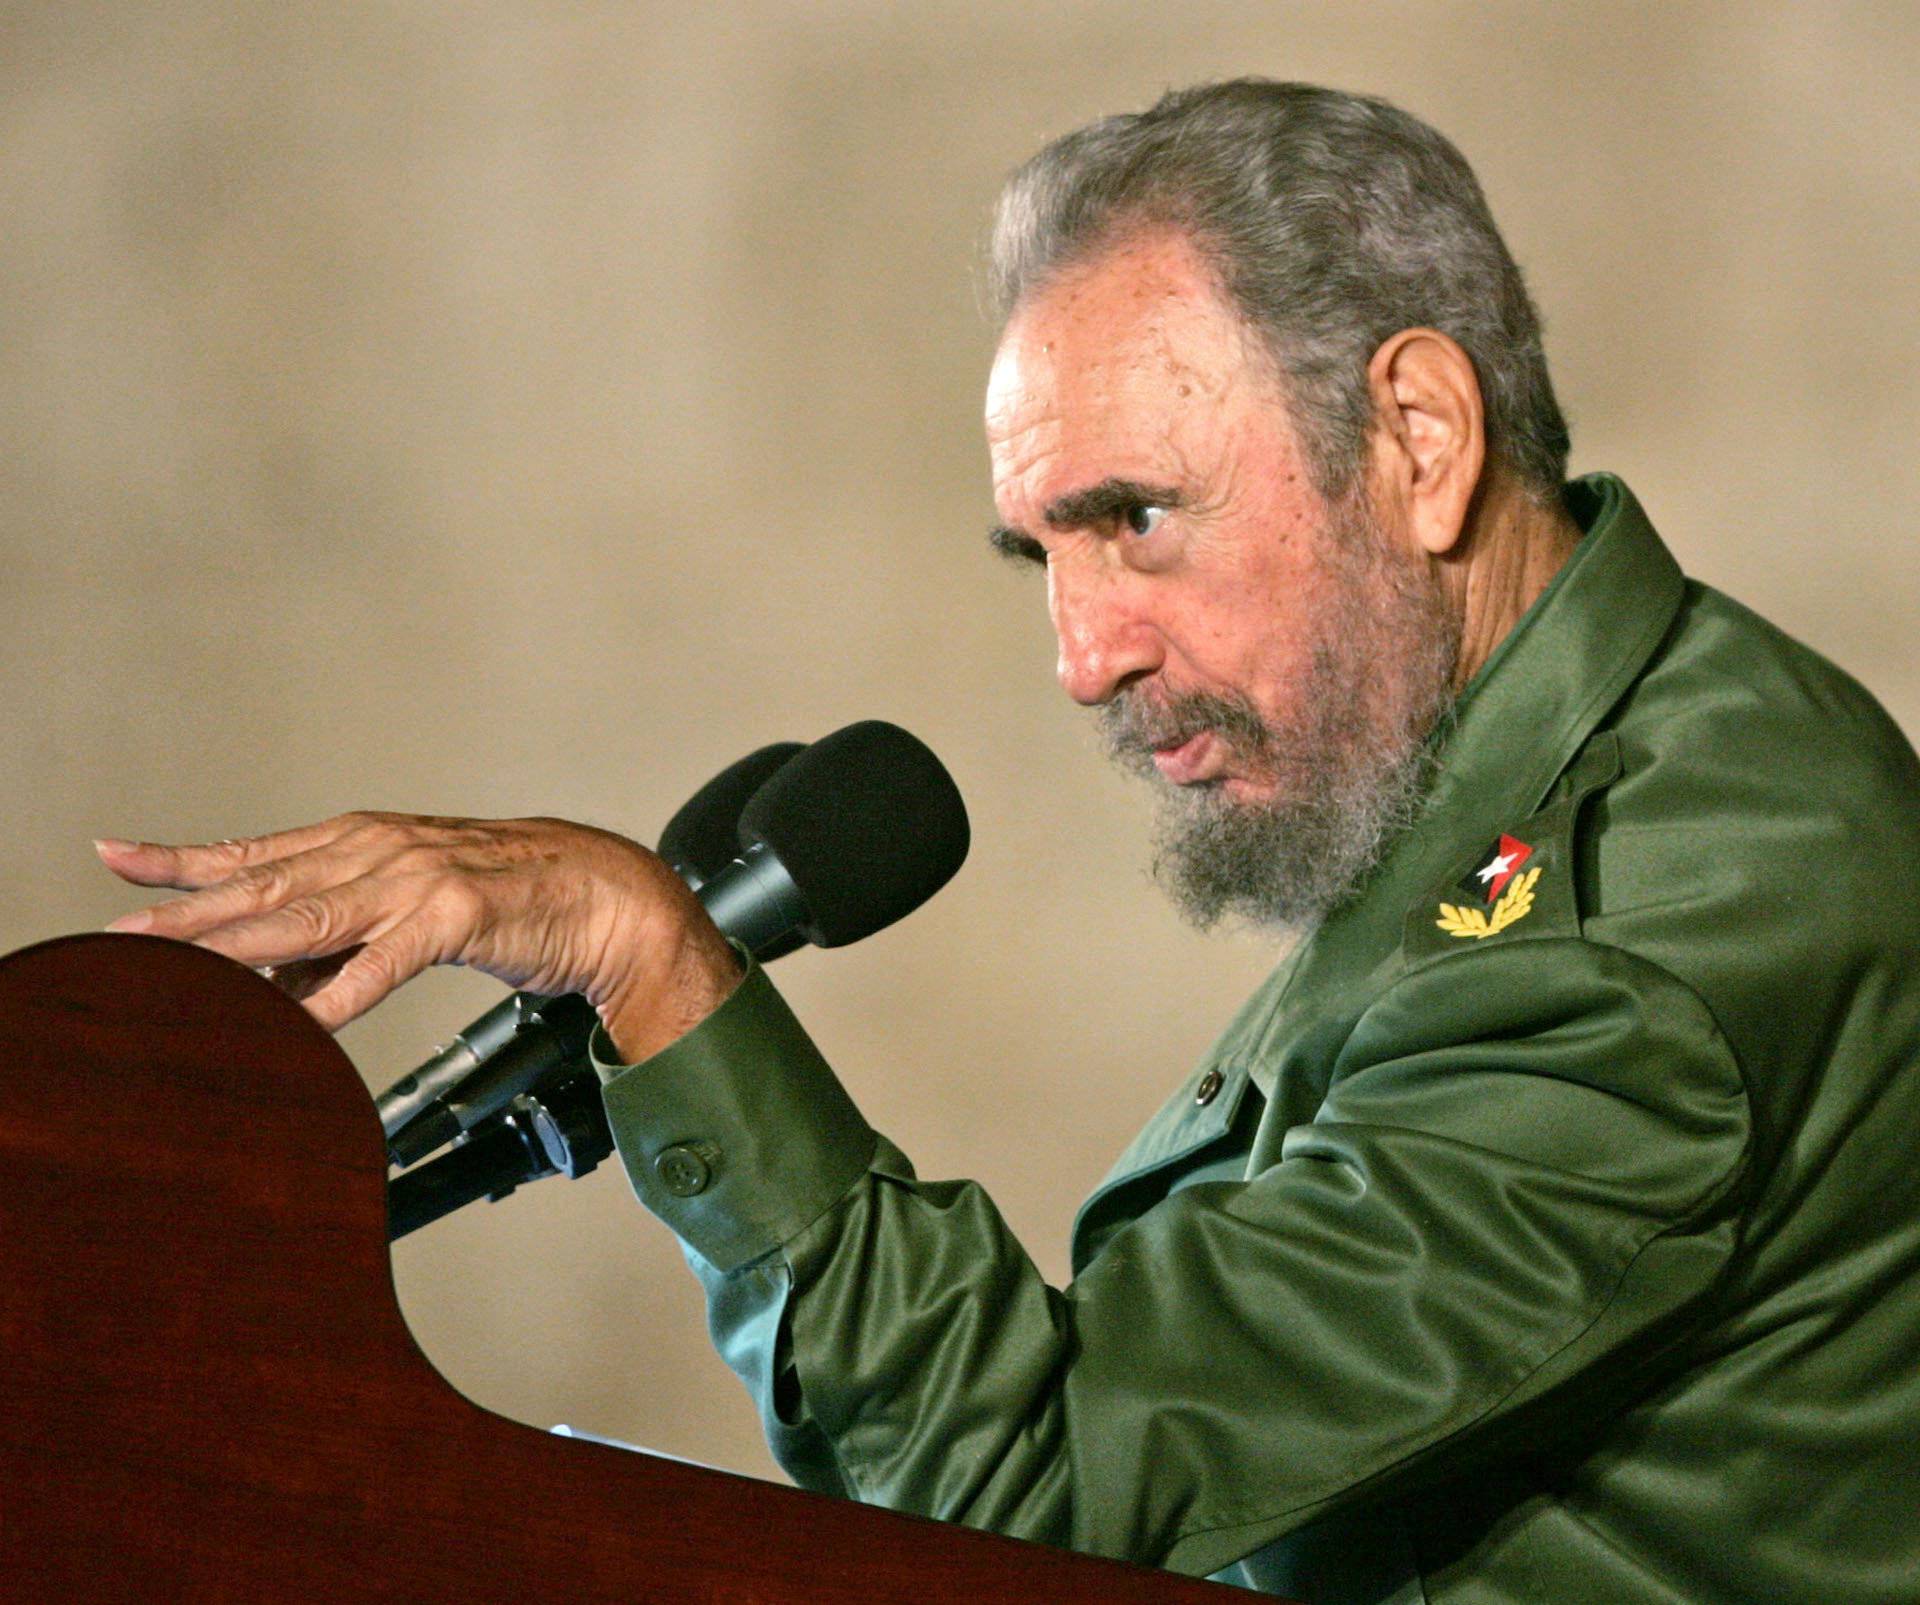 File photo of then Cuban President Fidel Castro addressing the audience during a political rally in celebration of the 12th birthday of Cuban boy Elian Gonzalez in Cardenas